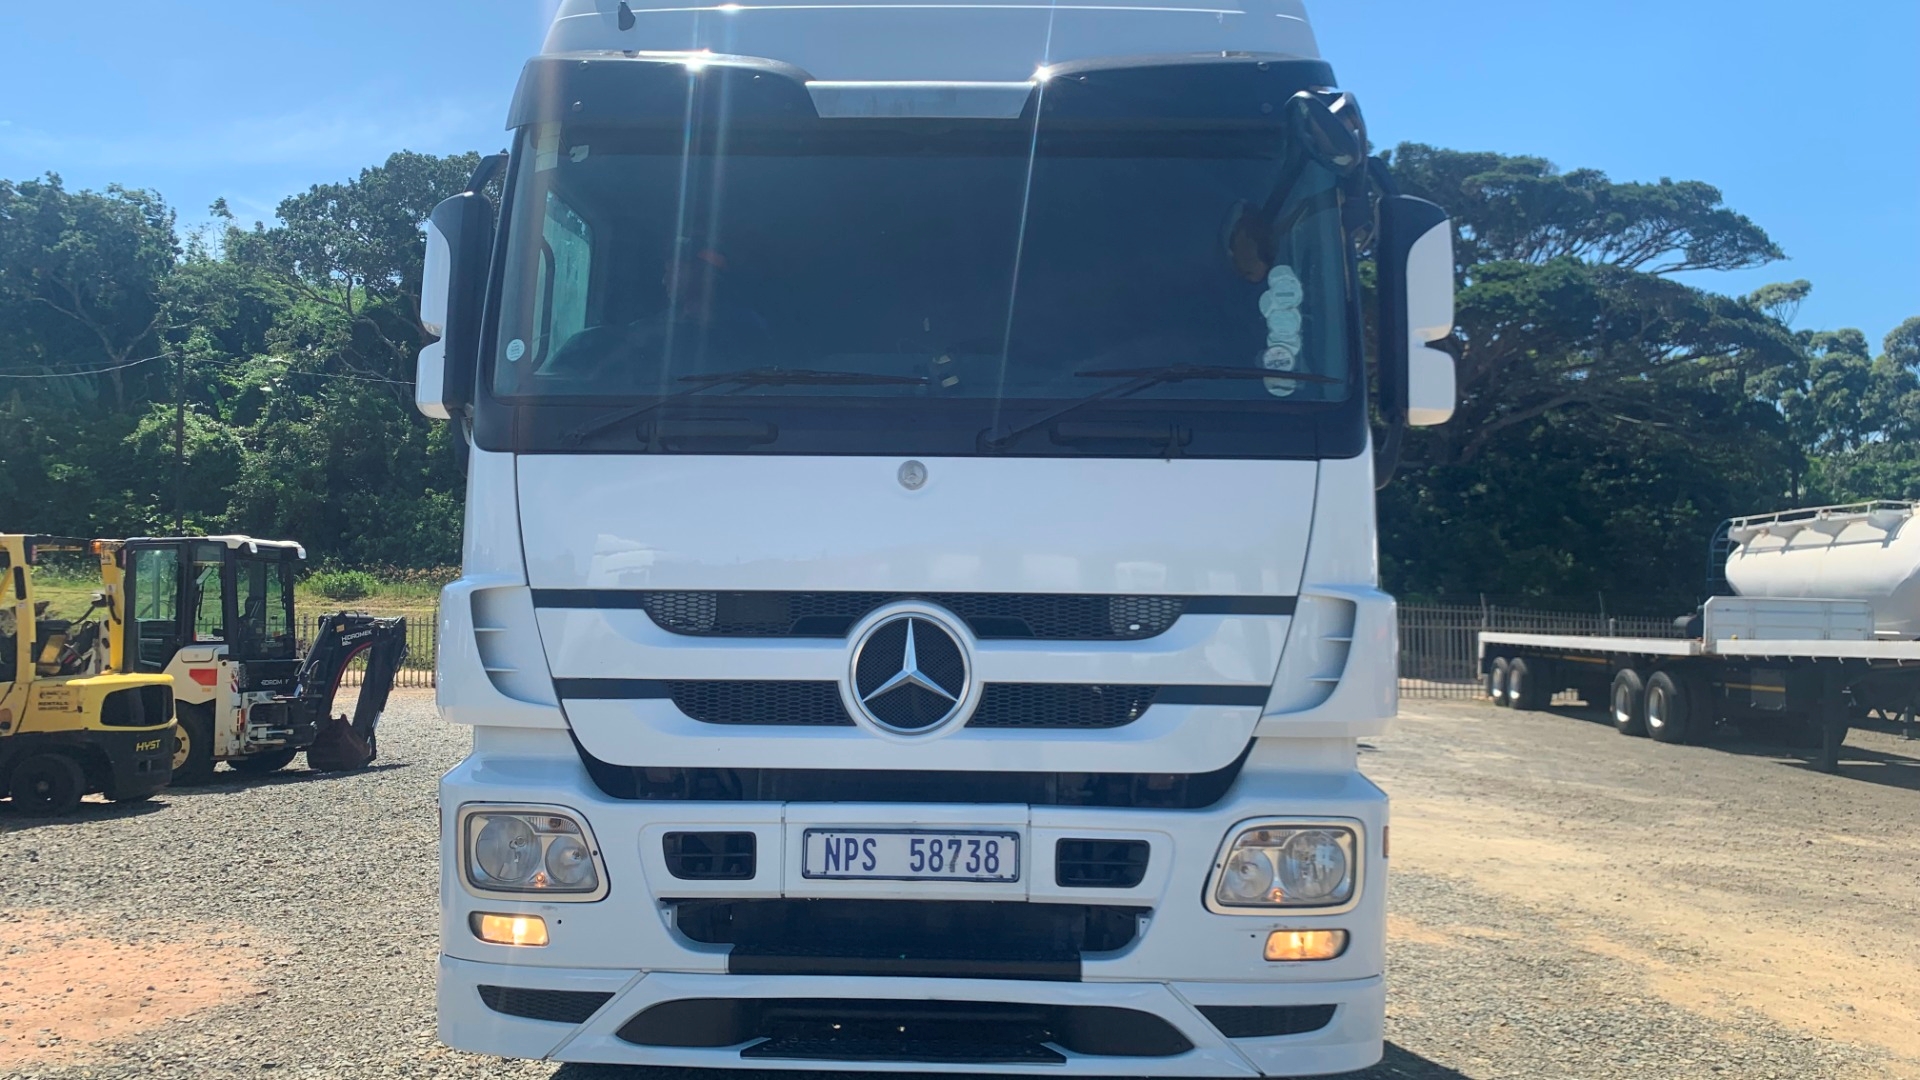 Mercedes Benz Truck tractors Double axle Mercedes Benz Actros 2646 2015 for sale by Truck Logistic | Truck & Trailer Marketplace